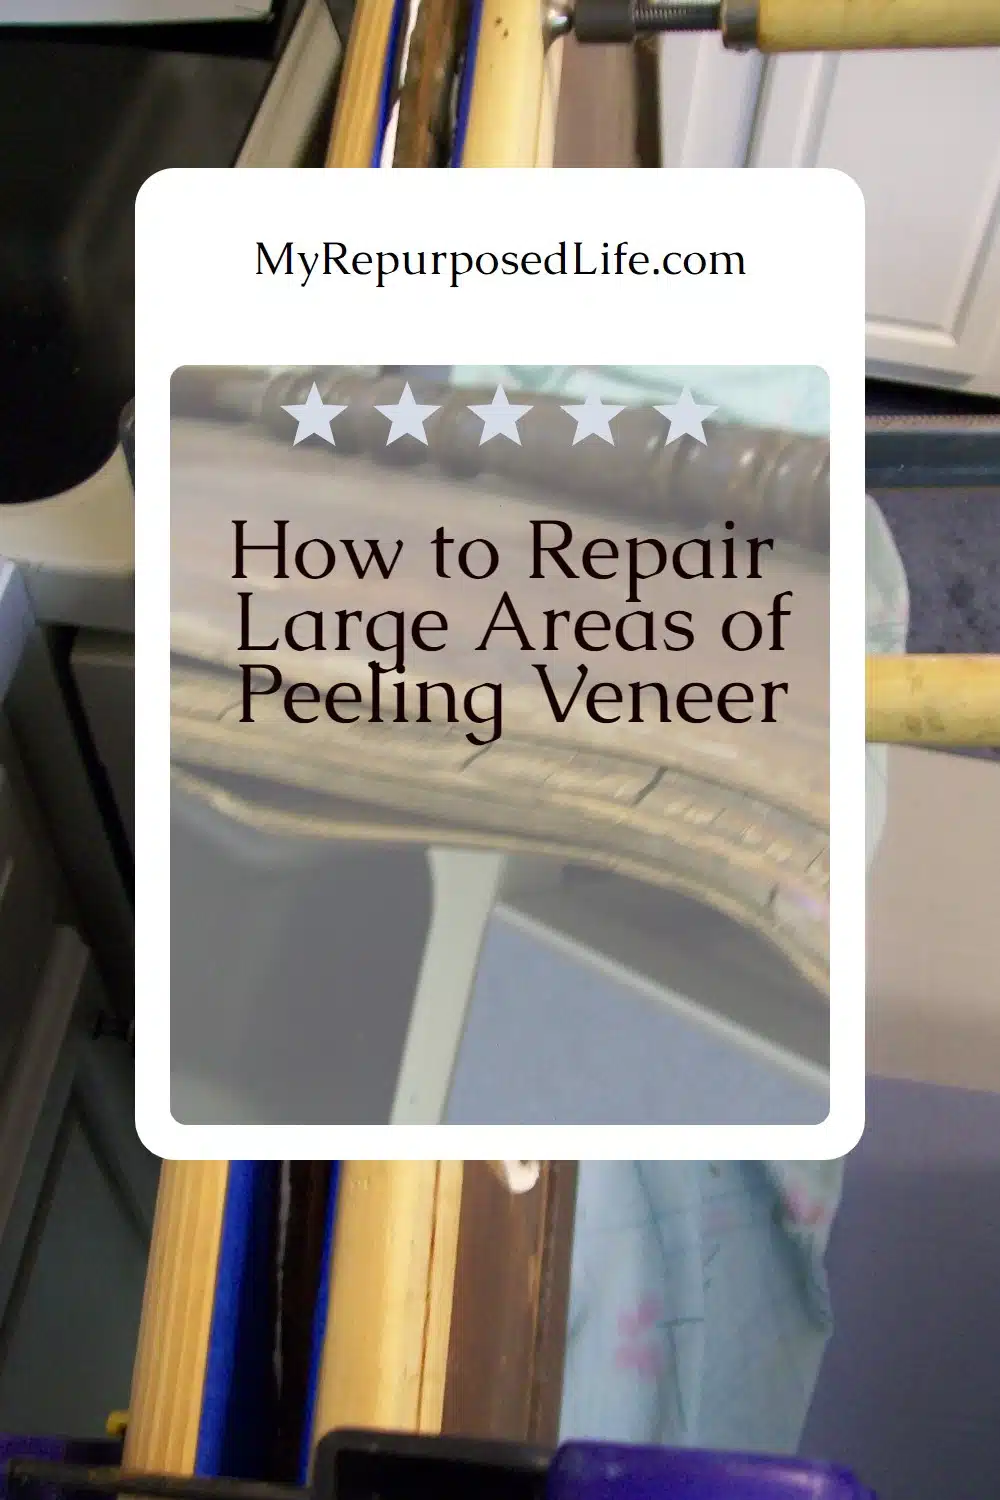 How to repair a headboard with peeling veneer. Step by step directions for gluing and clamping the veneer on an antique headboard. #MyRepurposedLife #repurposed #headboard #repair #veneer #clamp #secretTIP via @repurposedlife